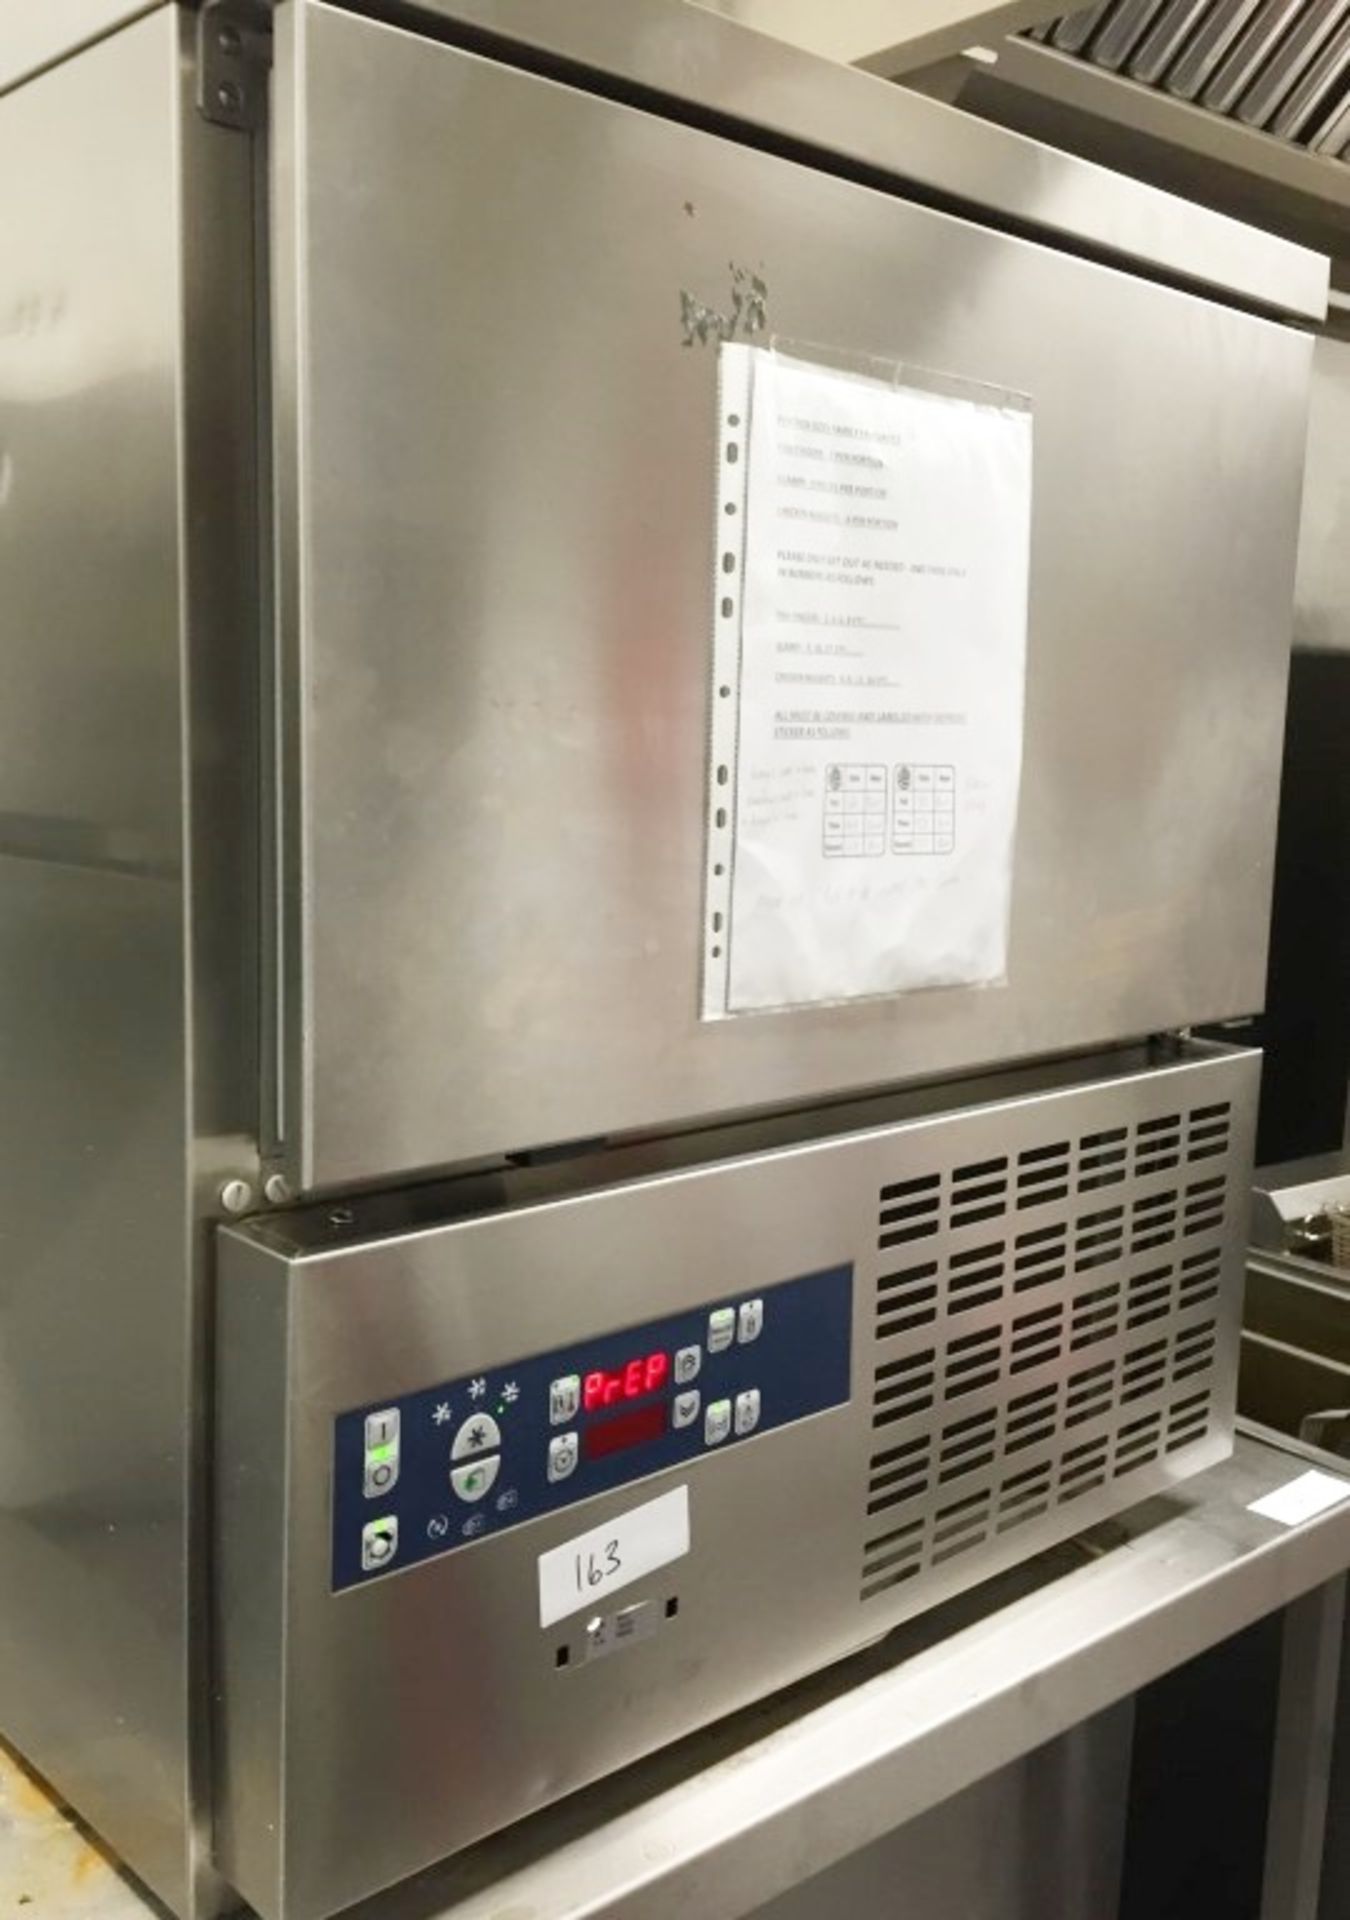 1 x Electrolux BLAST CHILLER Cabinet - Model RBC051 - Used For Rapid Chilling of Pre Processed